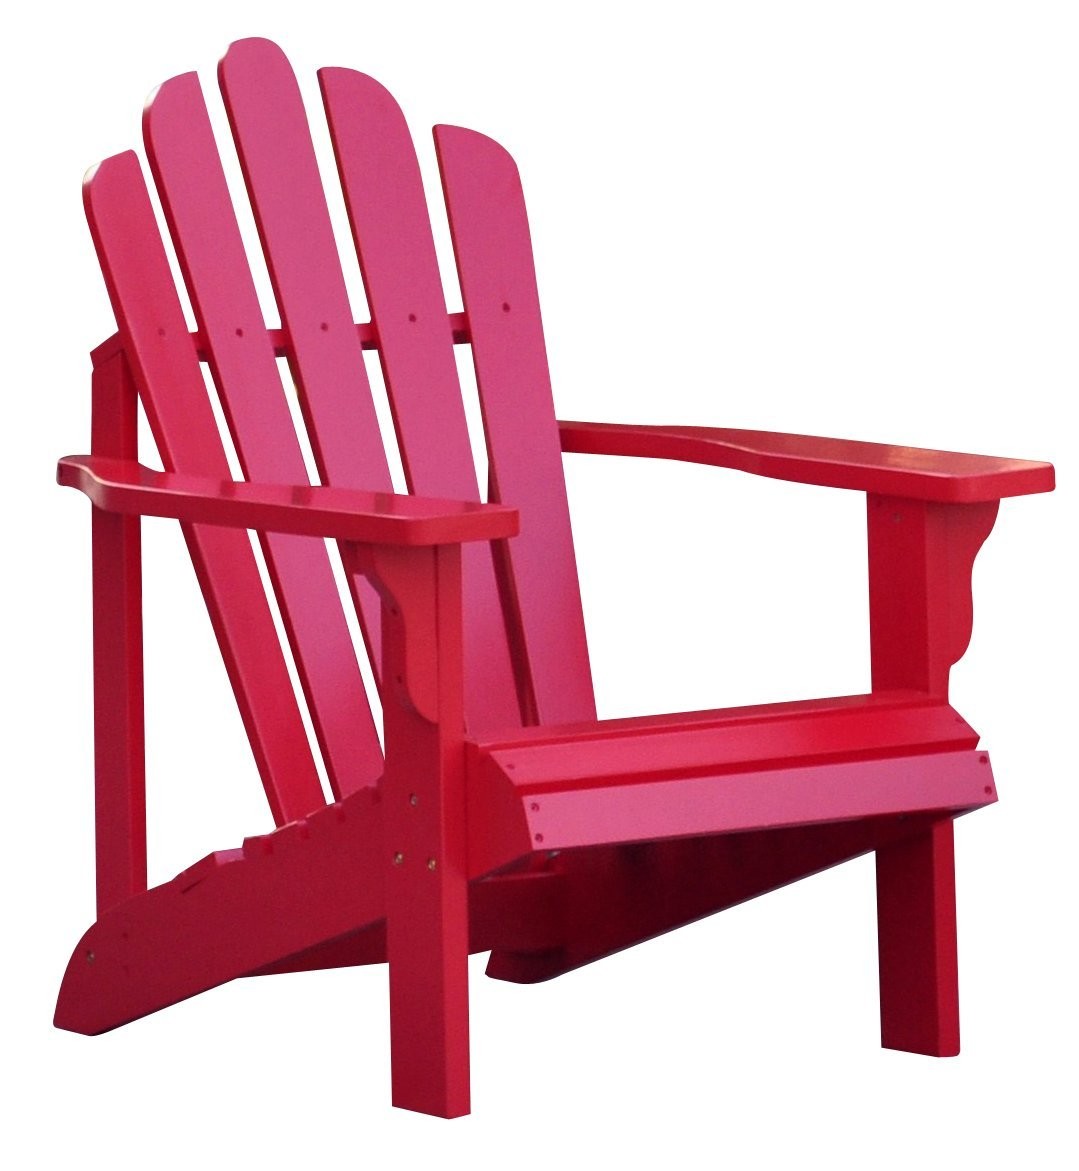 Factors To Consider Before Picking The Right Chair For Your Garden